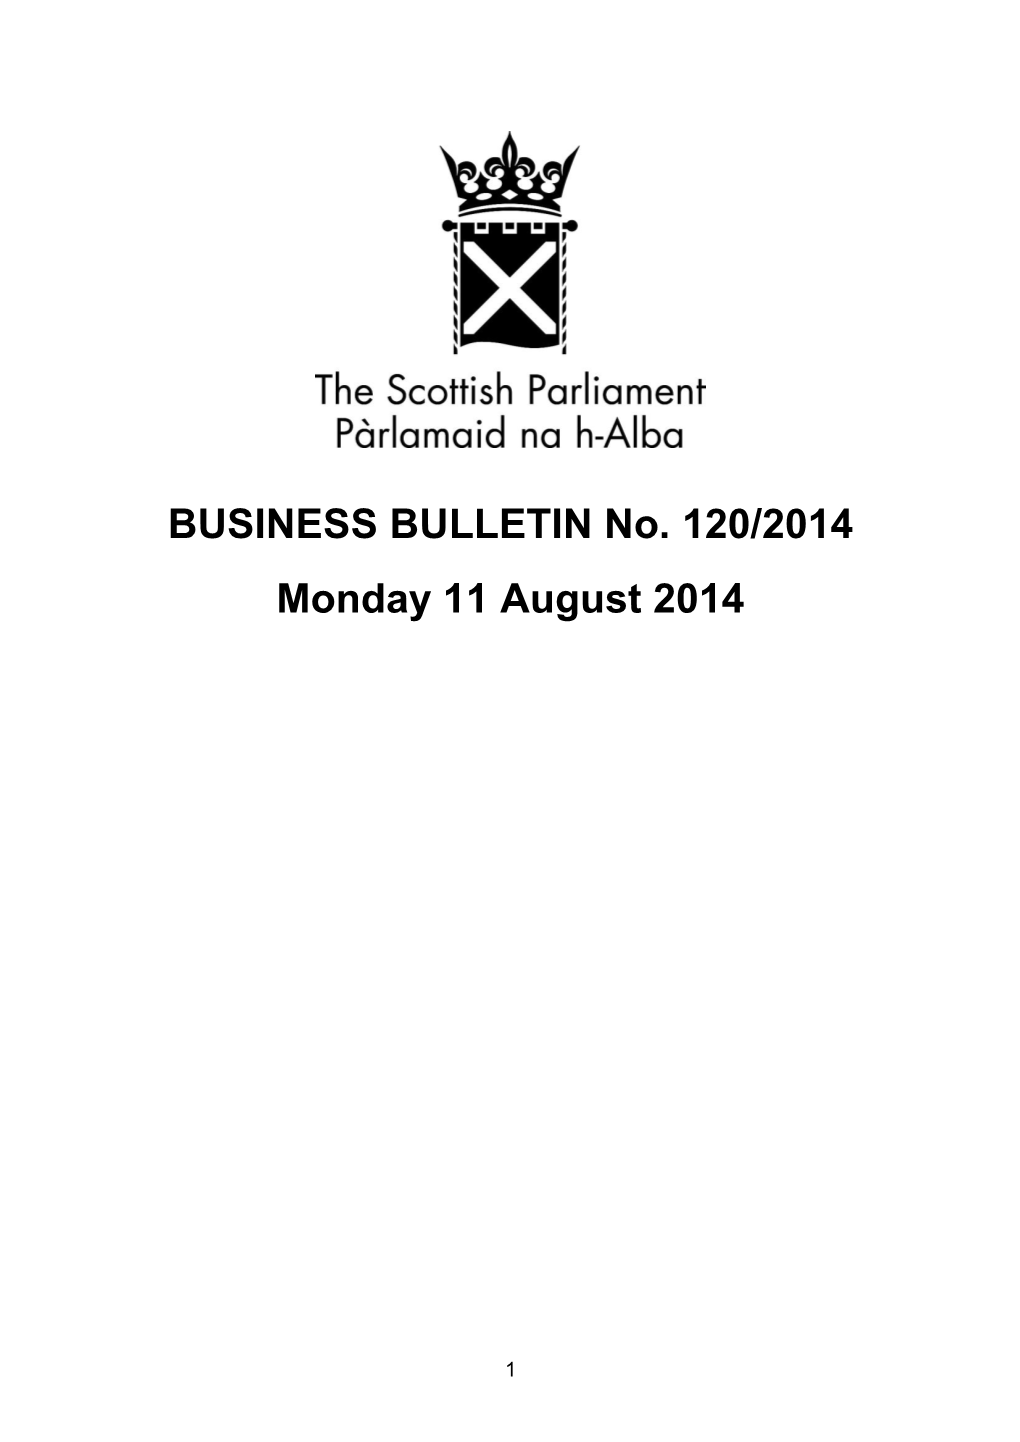 BUSINESS BULLETIN No. 120/2014 Monday 11 August 2014